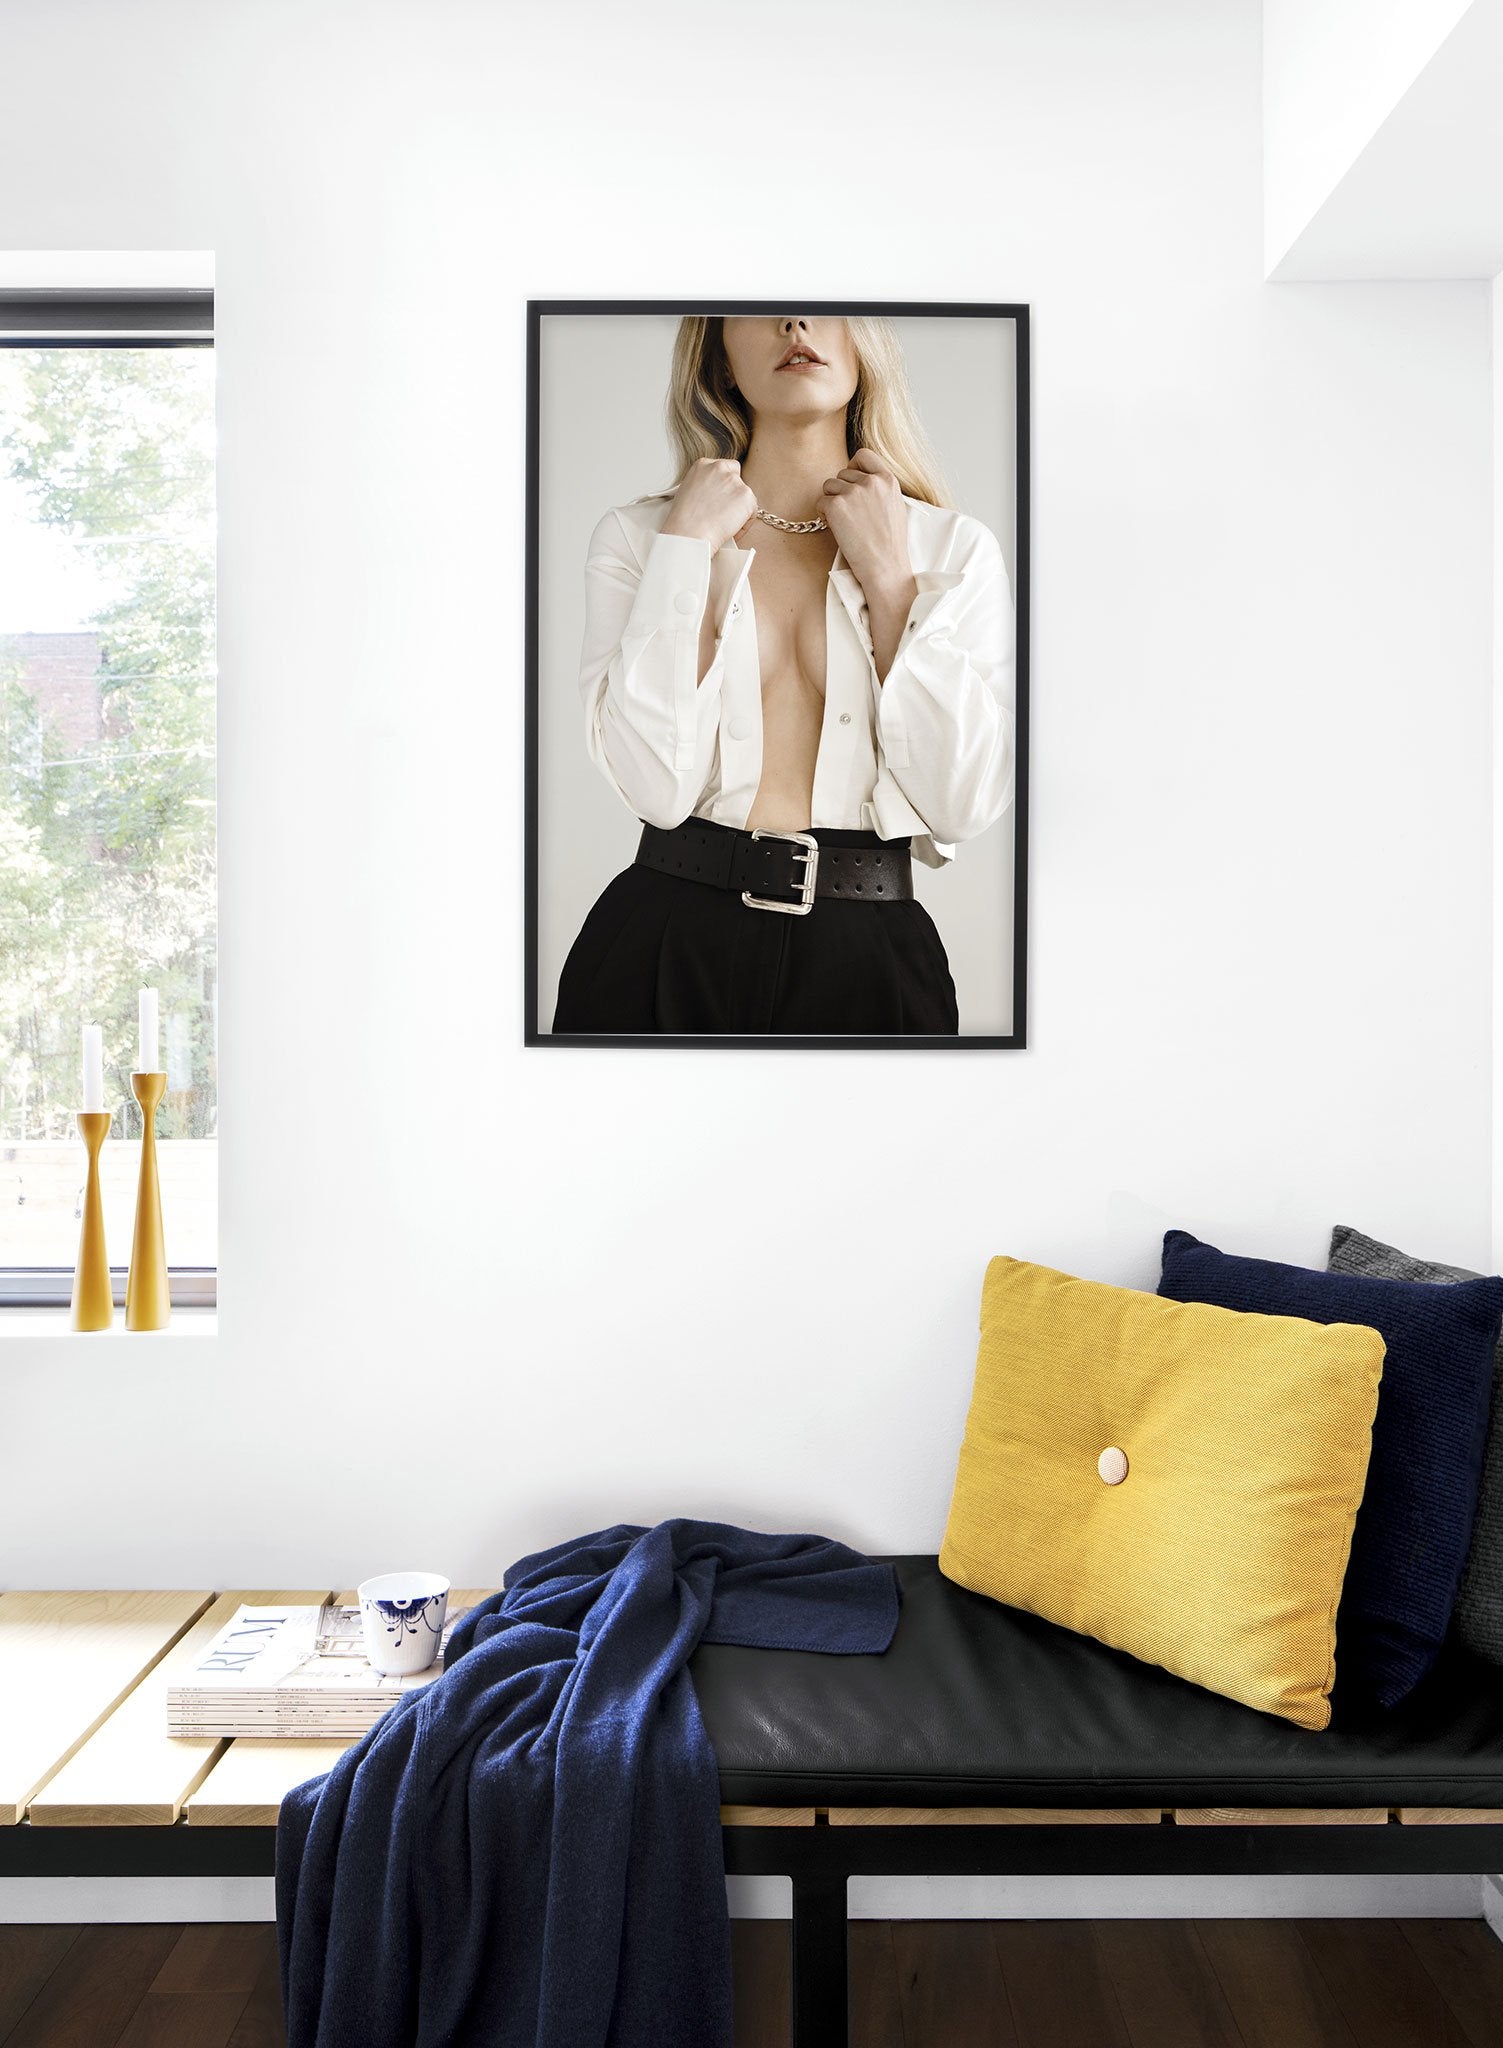 Fashion photography poster by Opposite Wall with woman in business clothing - Lifestyle - Bedroom